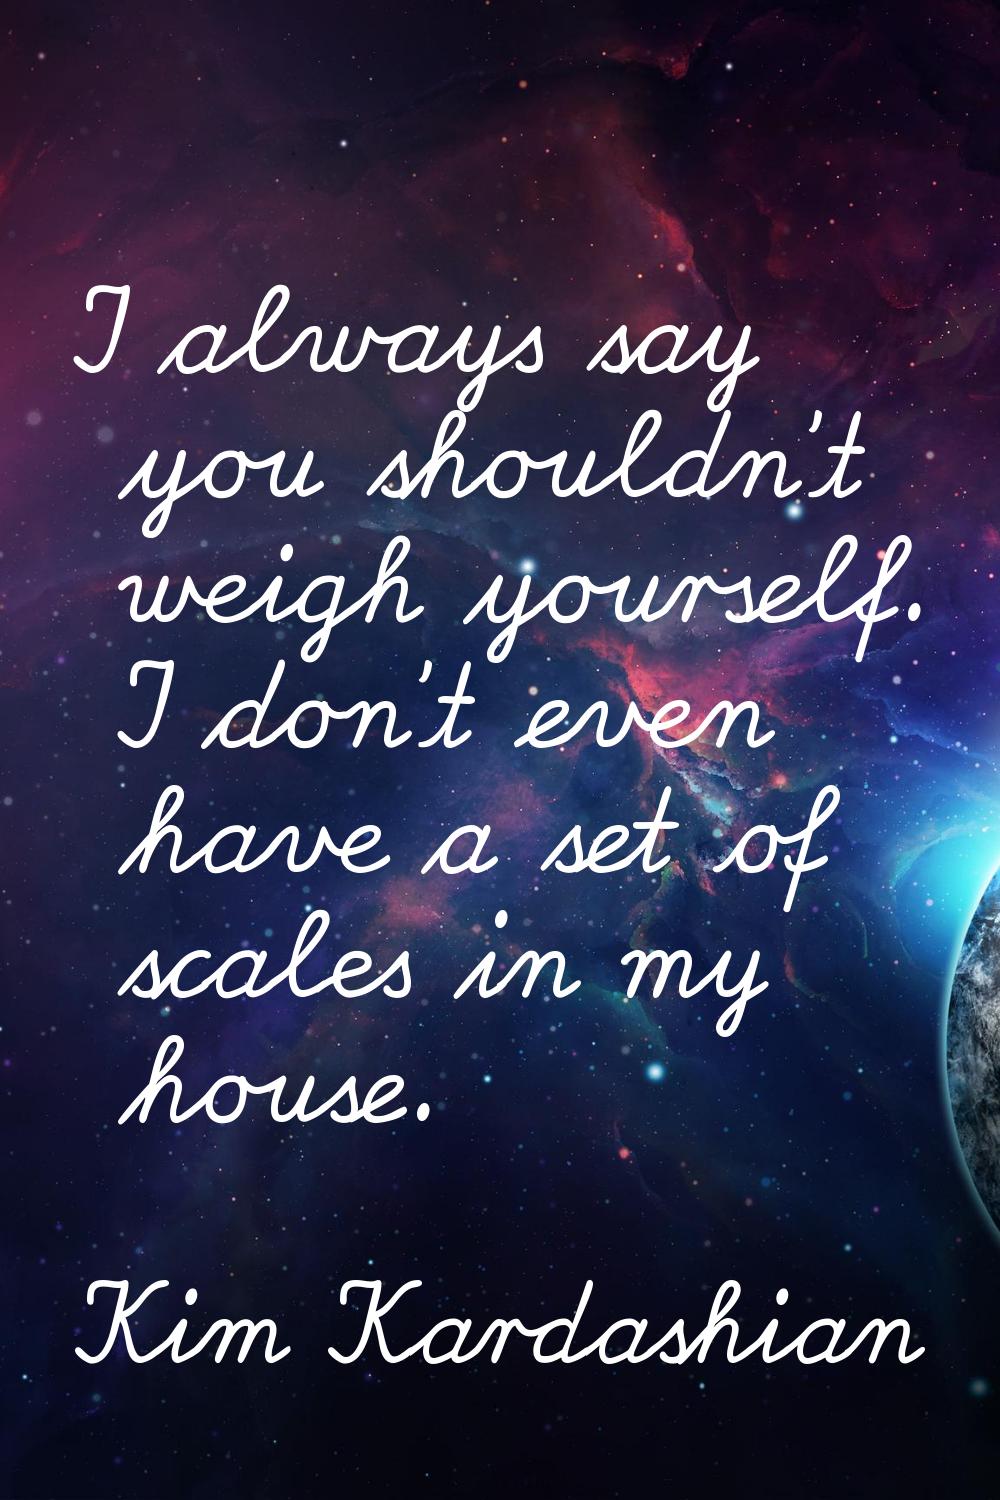 I always say you shouldn't weigh yourself. I don't even have a set of scales in my house.